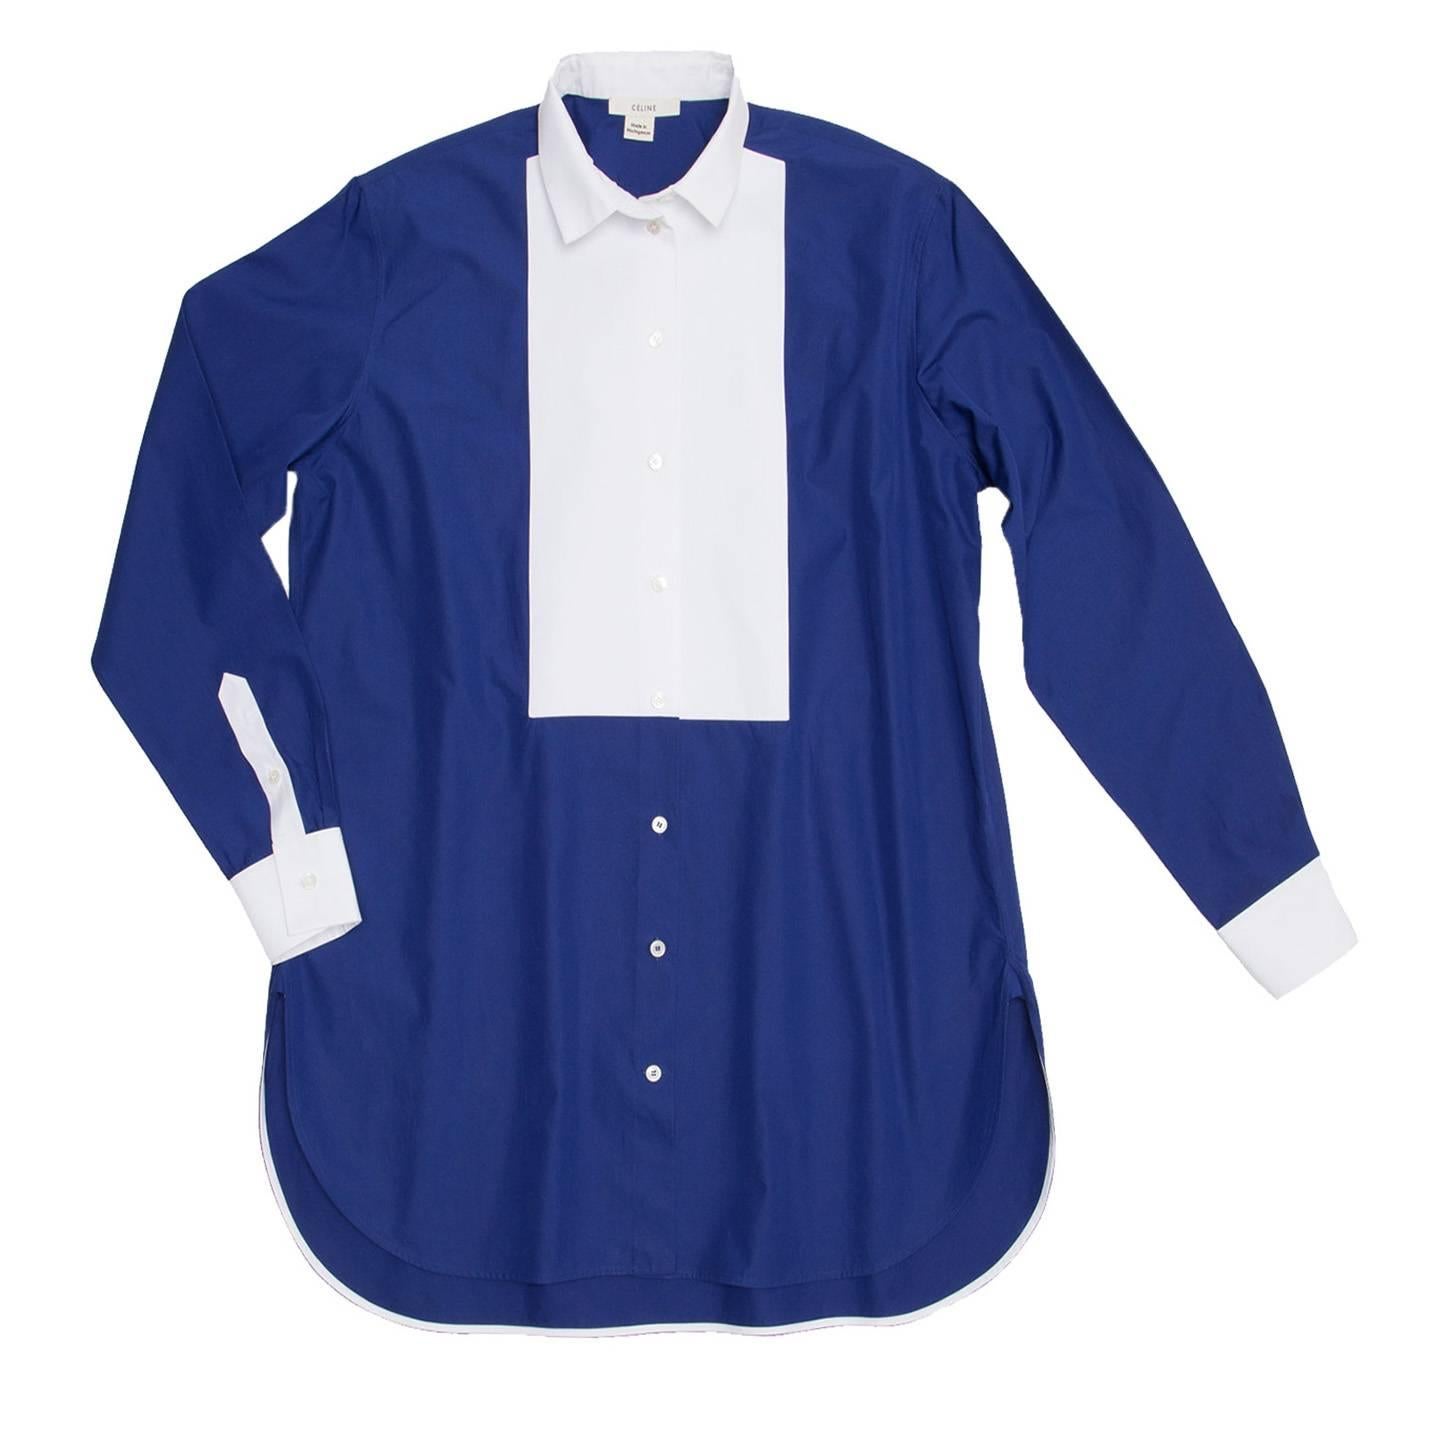 Cobalt blue shirt with white cuffs, buttons and inner hem binding matching the spread neck and bib detail. The fit of the shirt/tunic is long and comfortable and the hem is round with opening at side seams.

Size  38 French sizing

Condition 